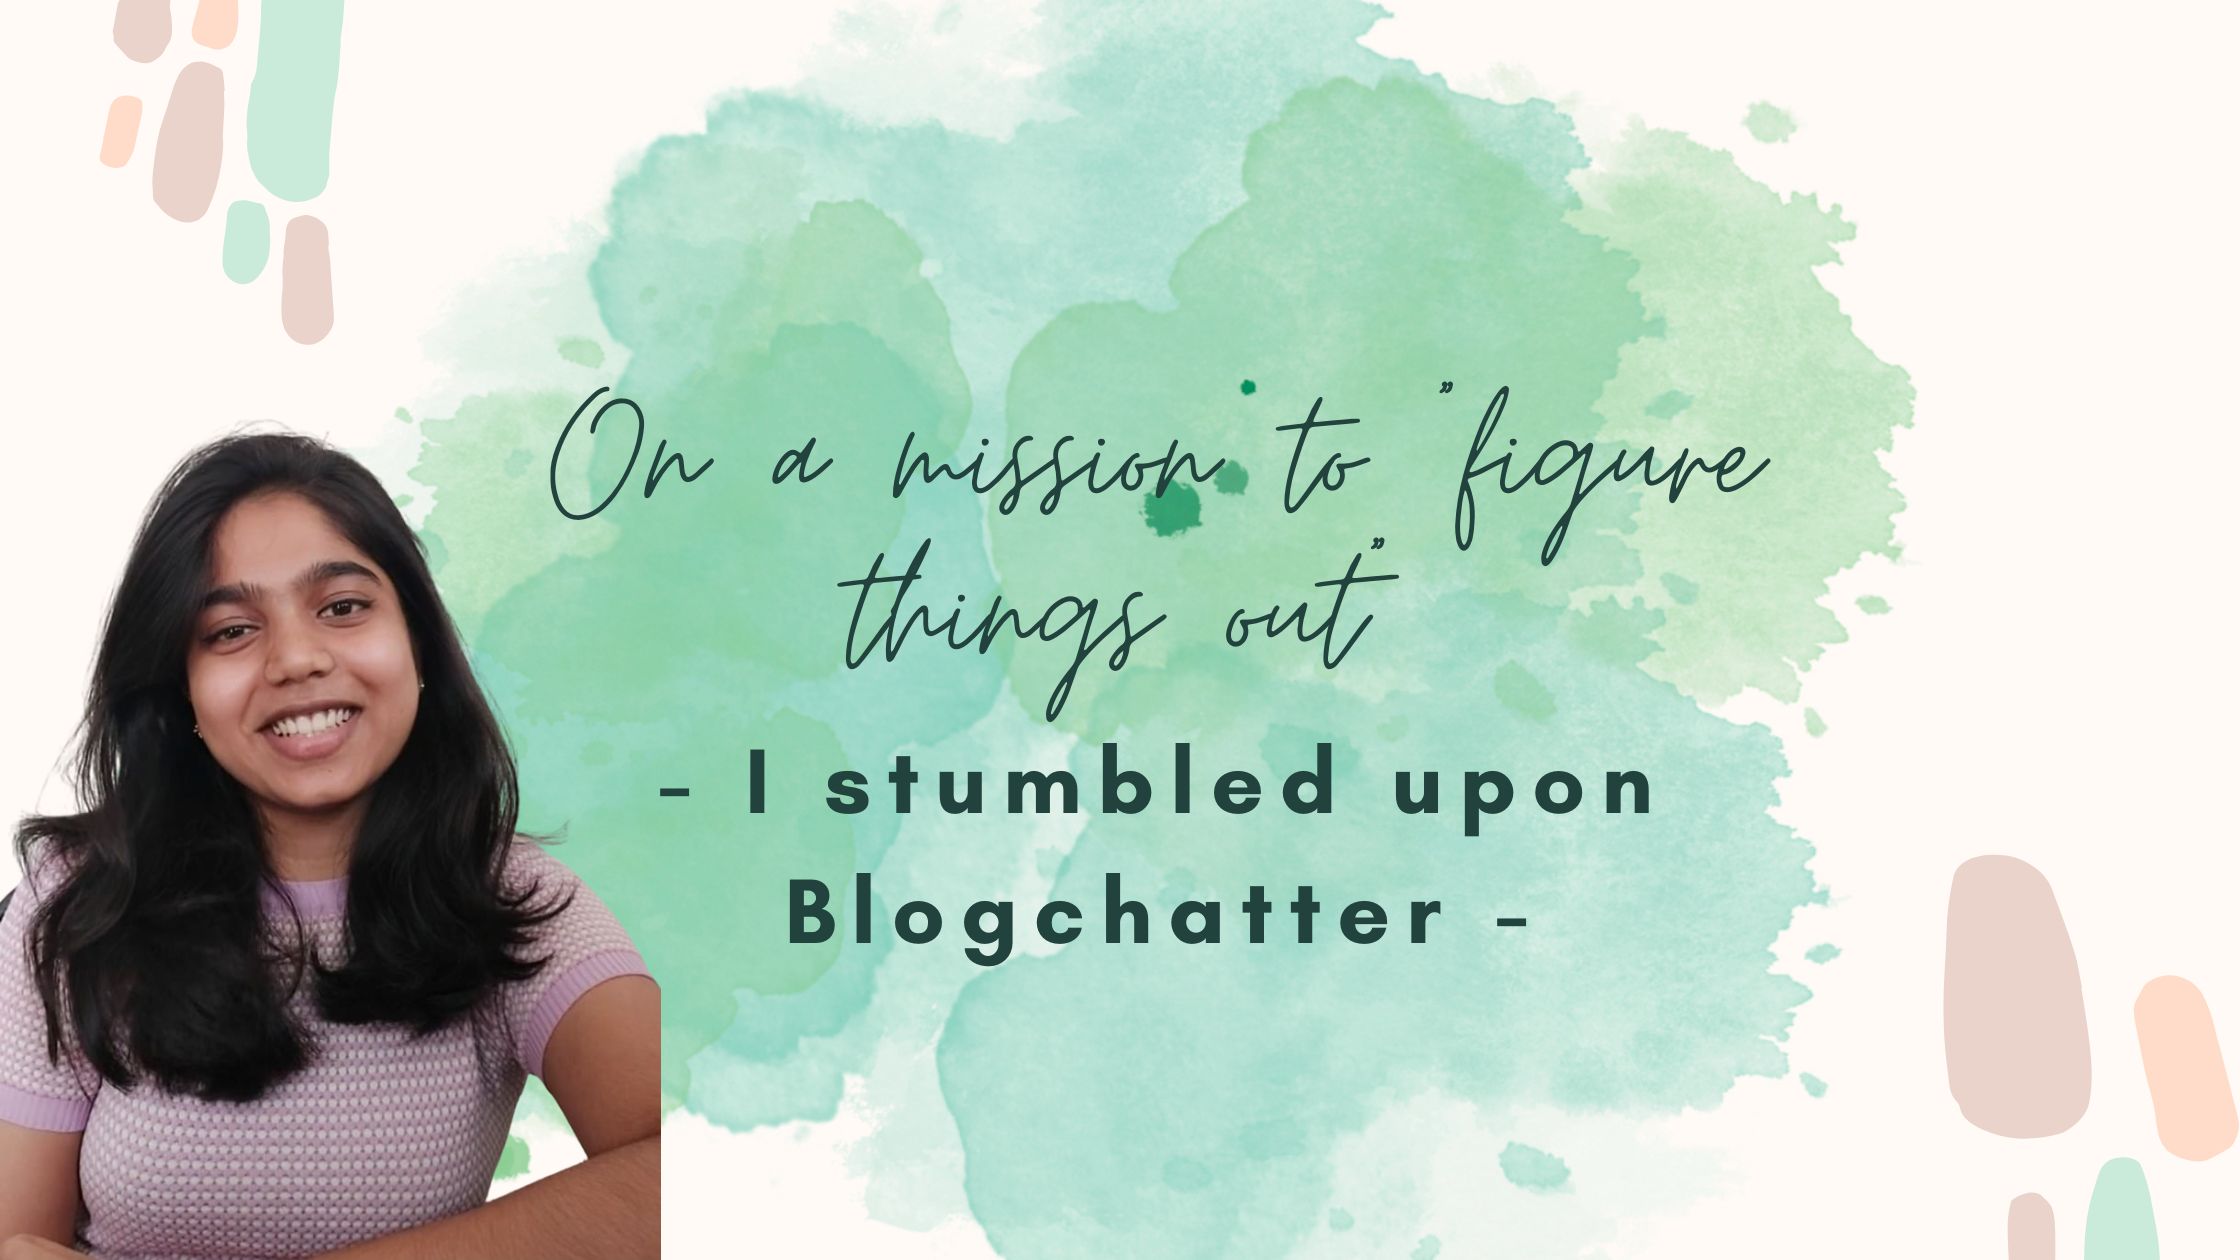 On a mission to “figure things out”, I stumbled upon Blogchatter